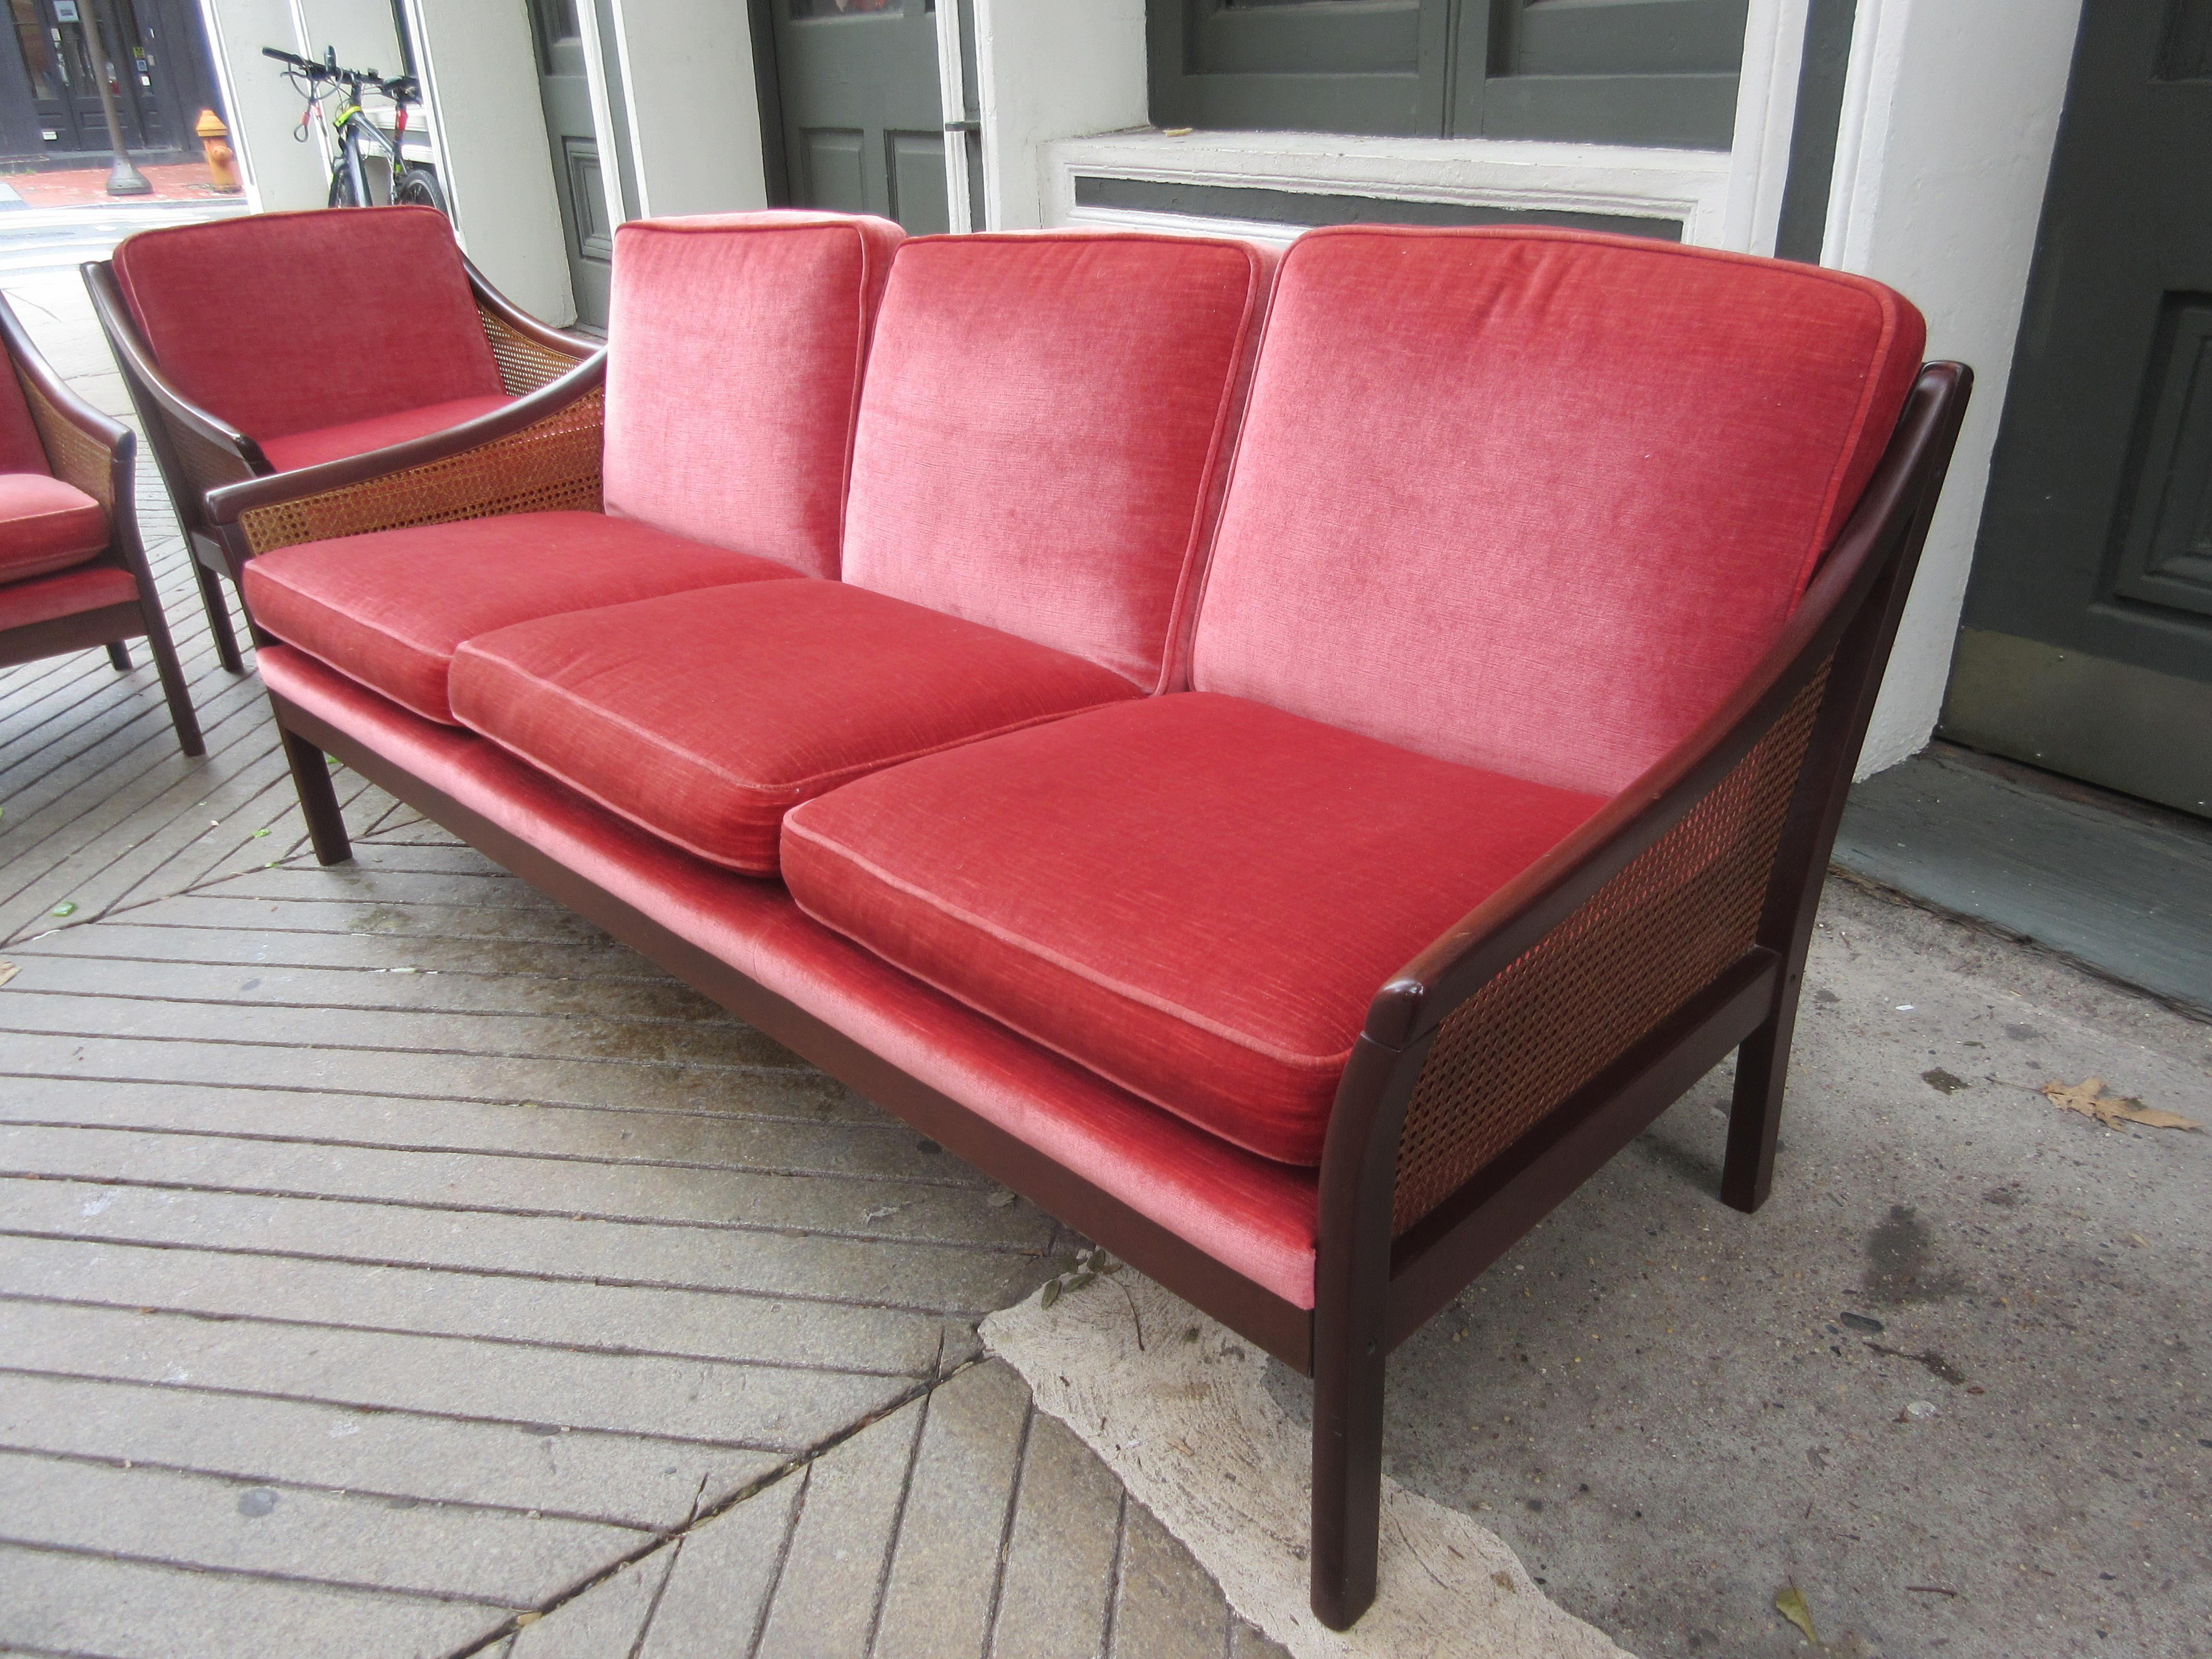 Vatne Mobler mahogany sofa with raspberry mohair cushions and cane sides and back. We have original documentation and bill of sale from Dane decor in 1979 listing a $2175 price tag. Everything is in excellent original condition with no wear or